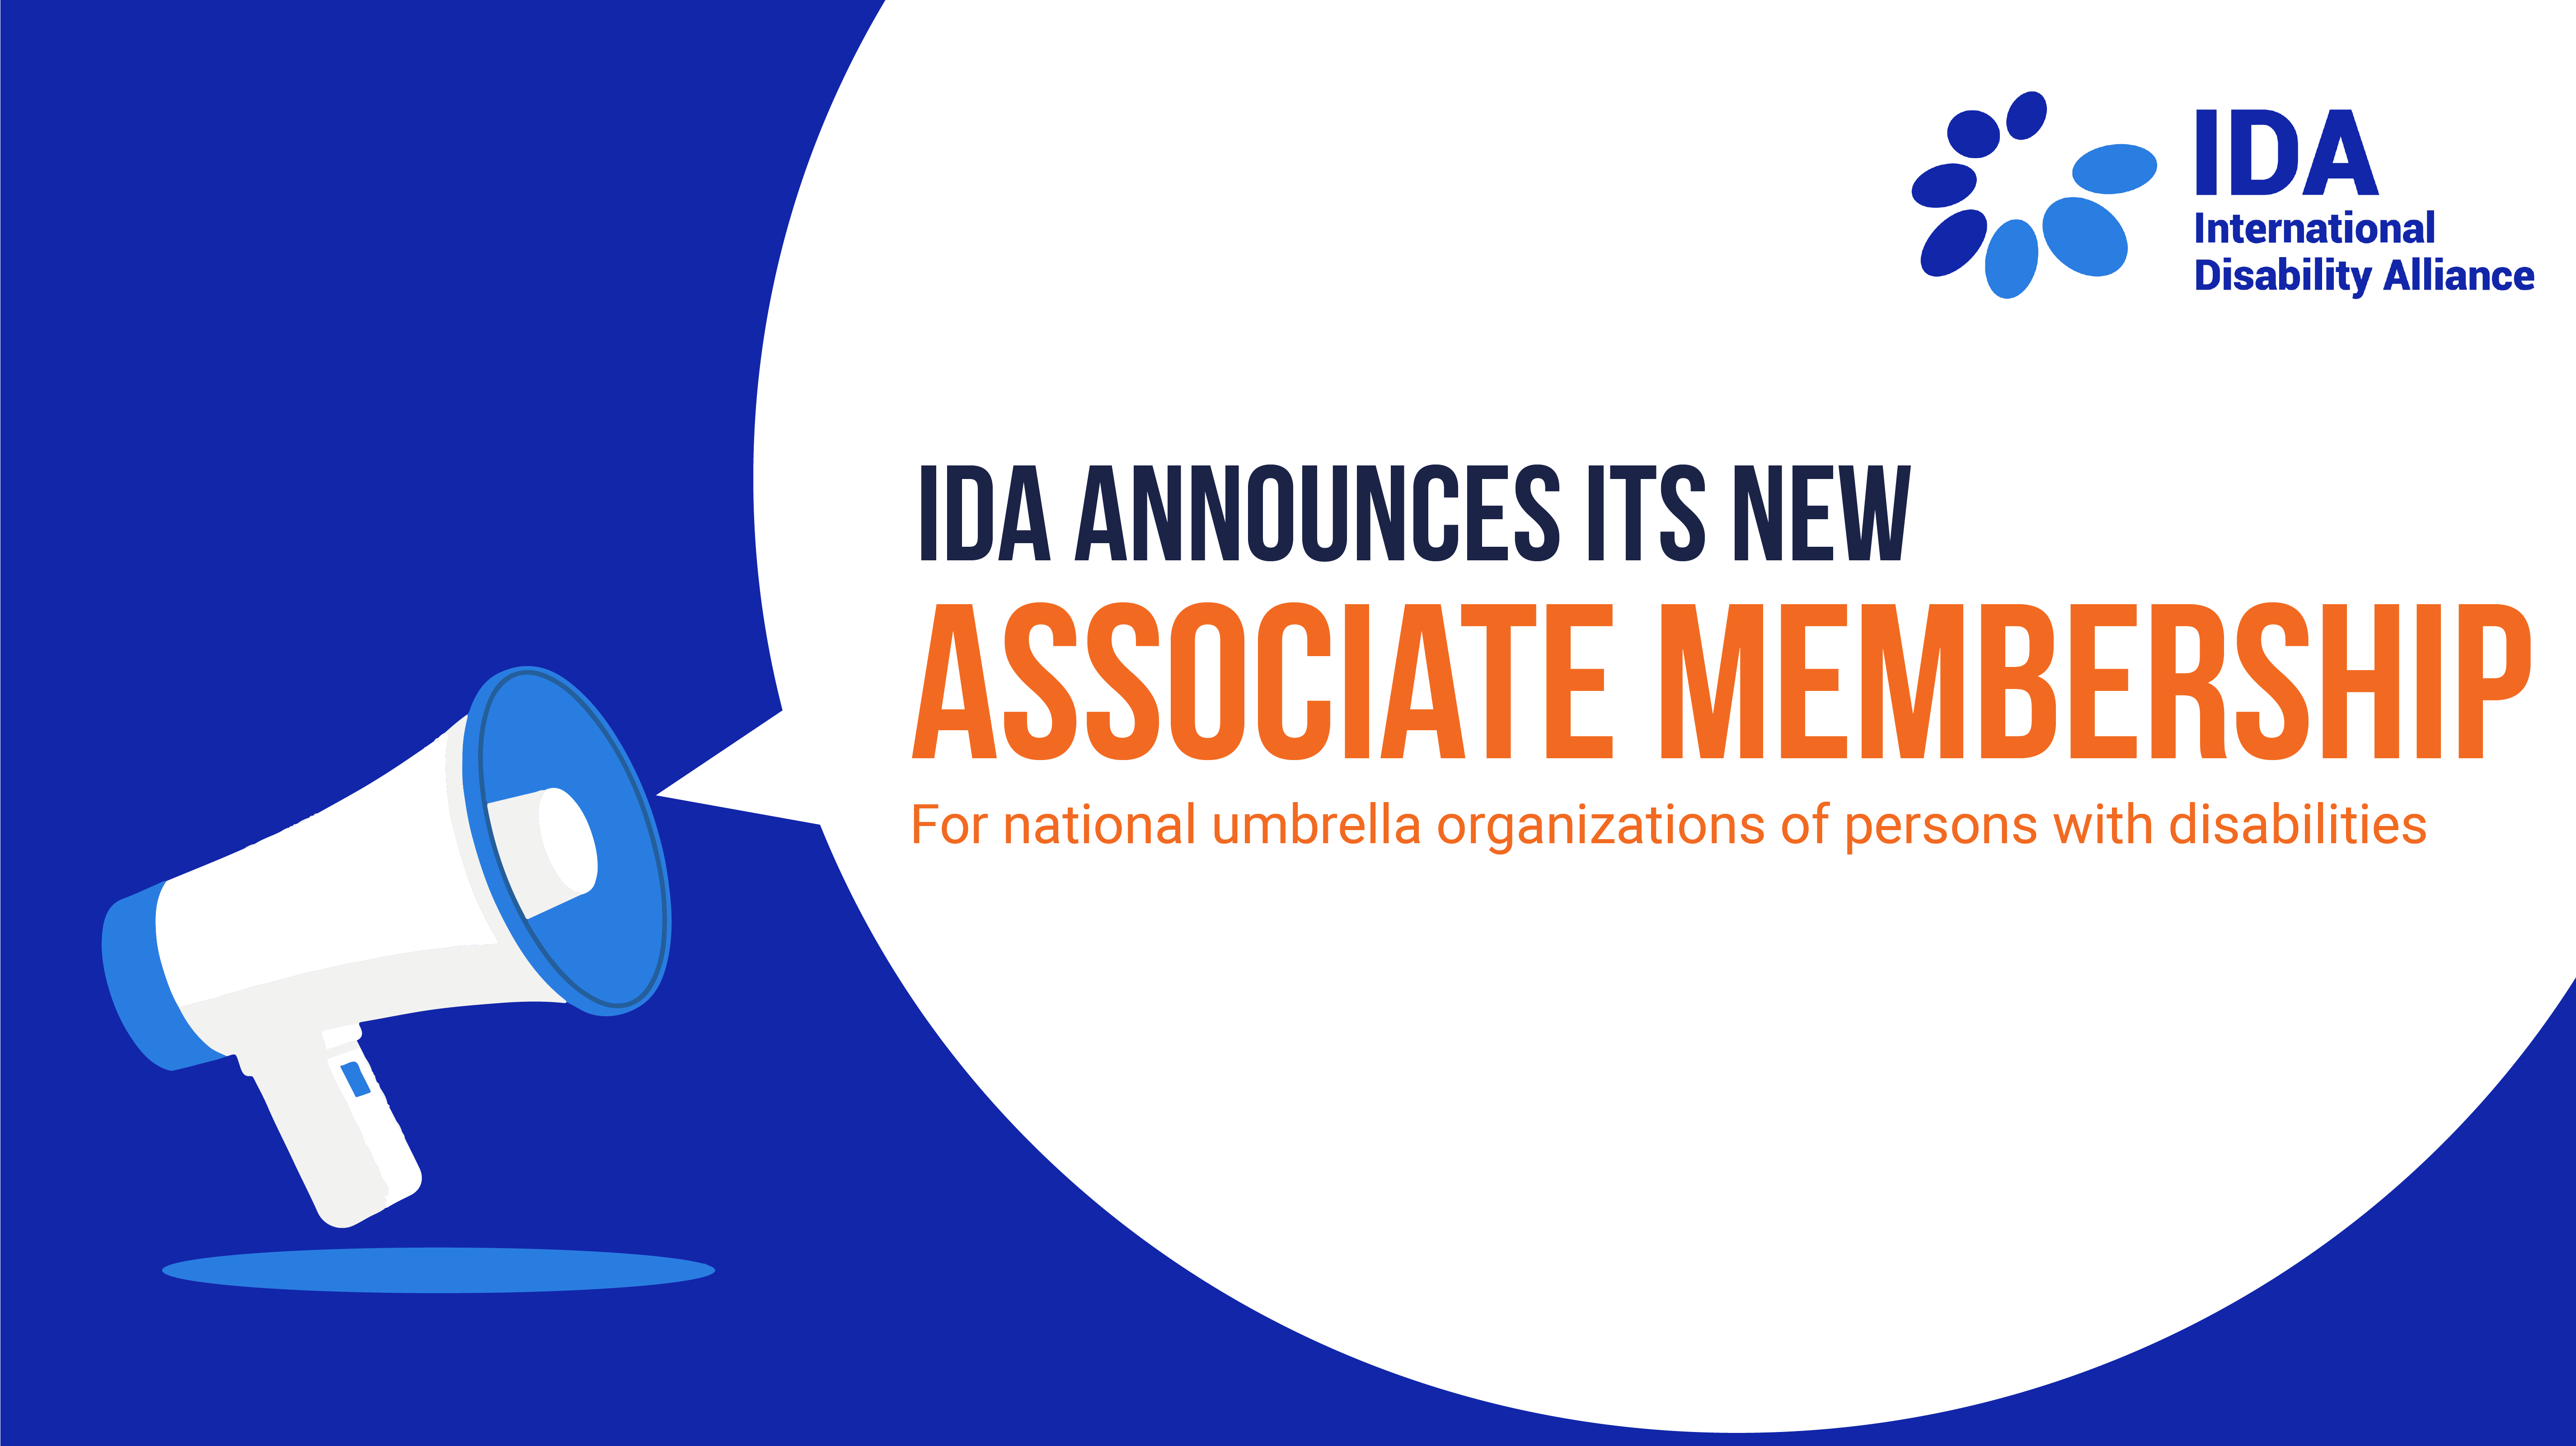 IDA launched a new type of Membership!